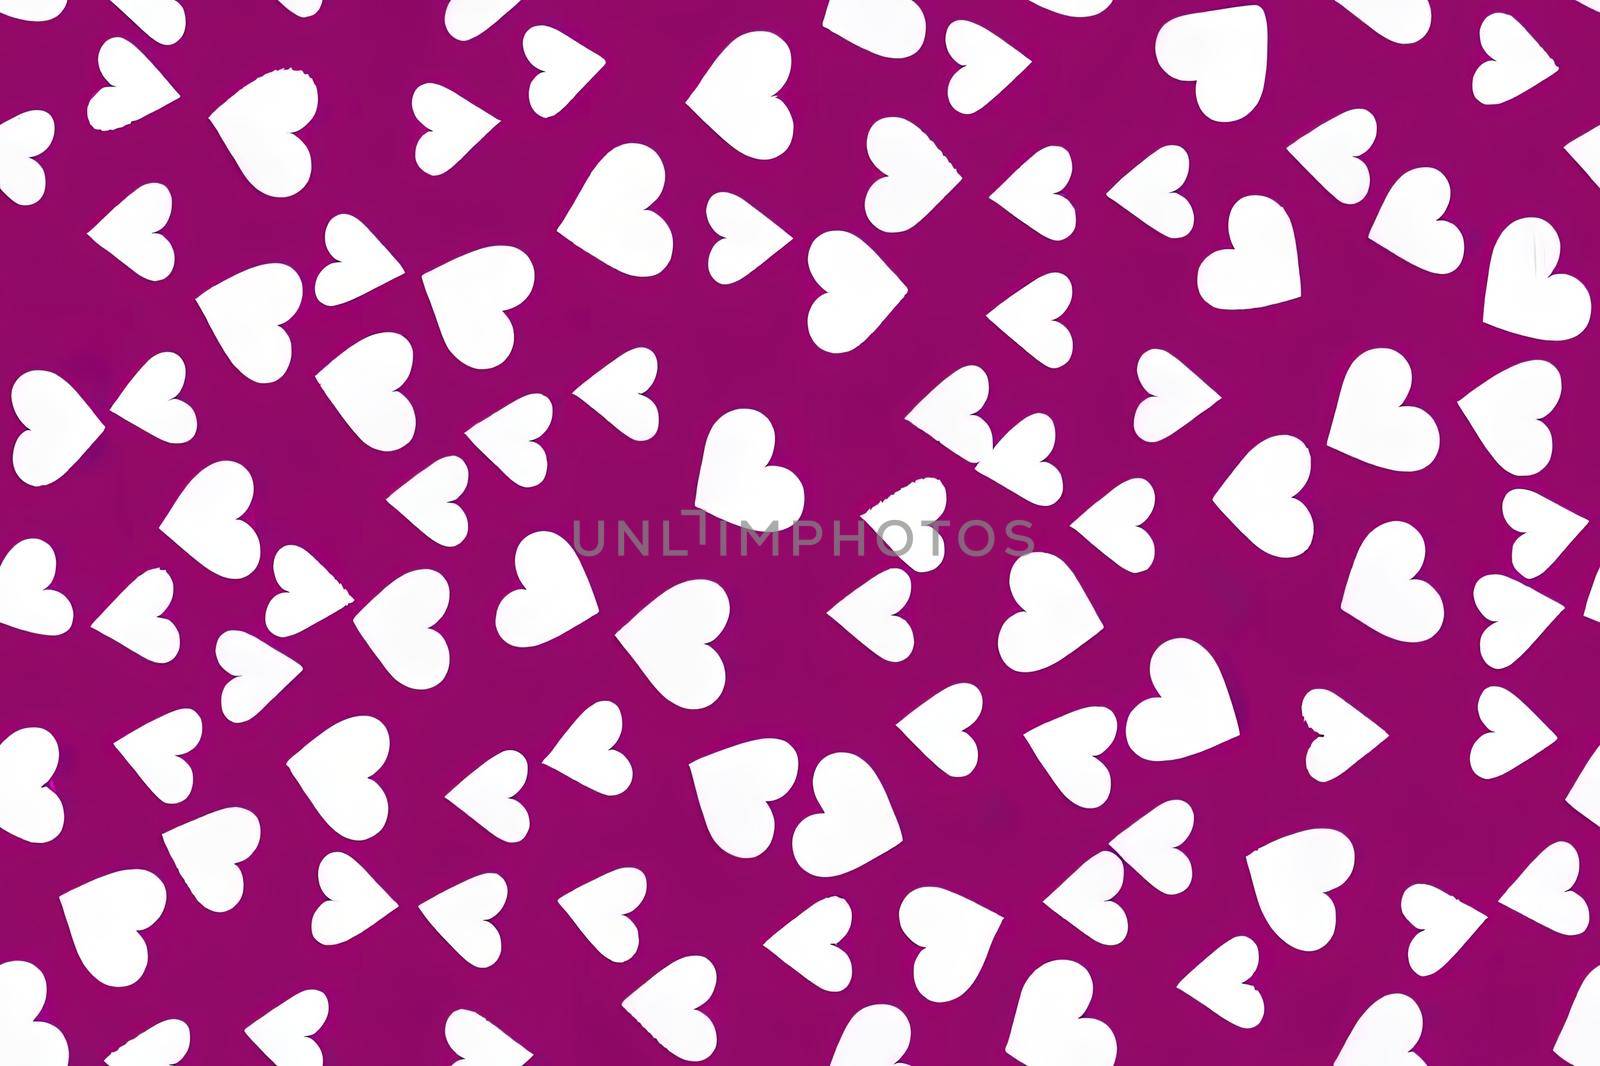 2d white fluffy heart seamless pattern isolated on pink background Cute moder design surface